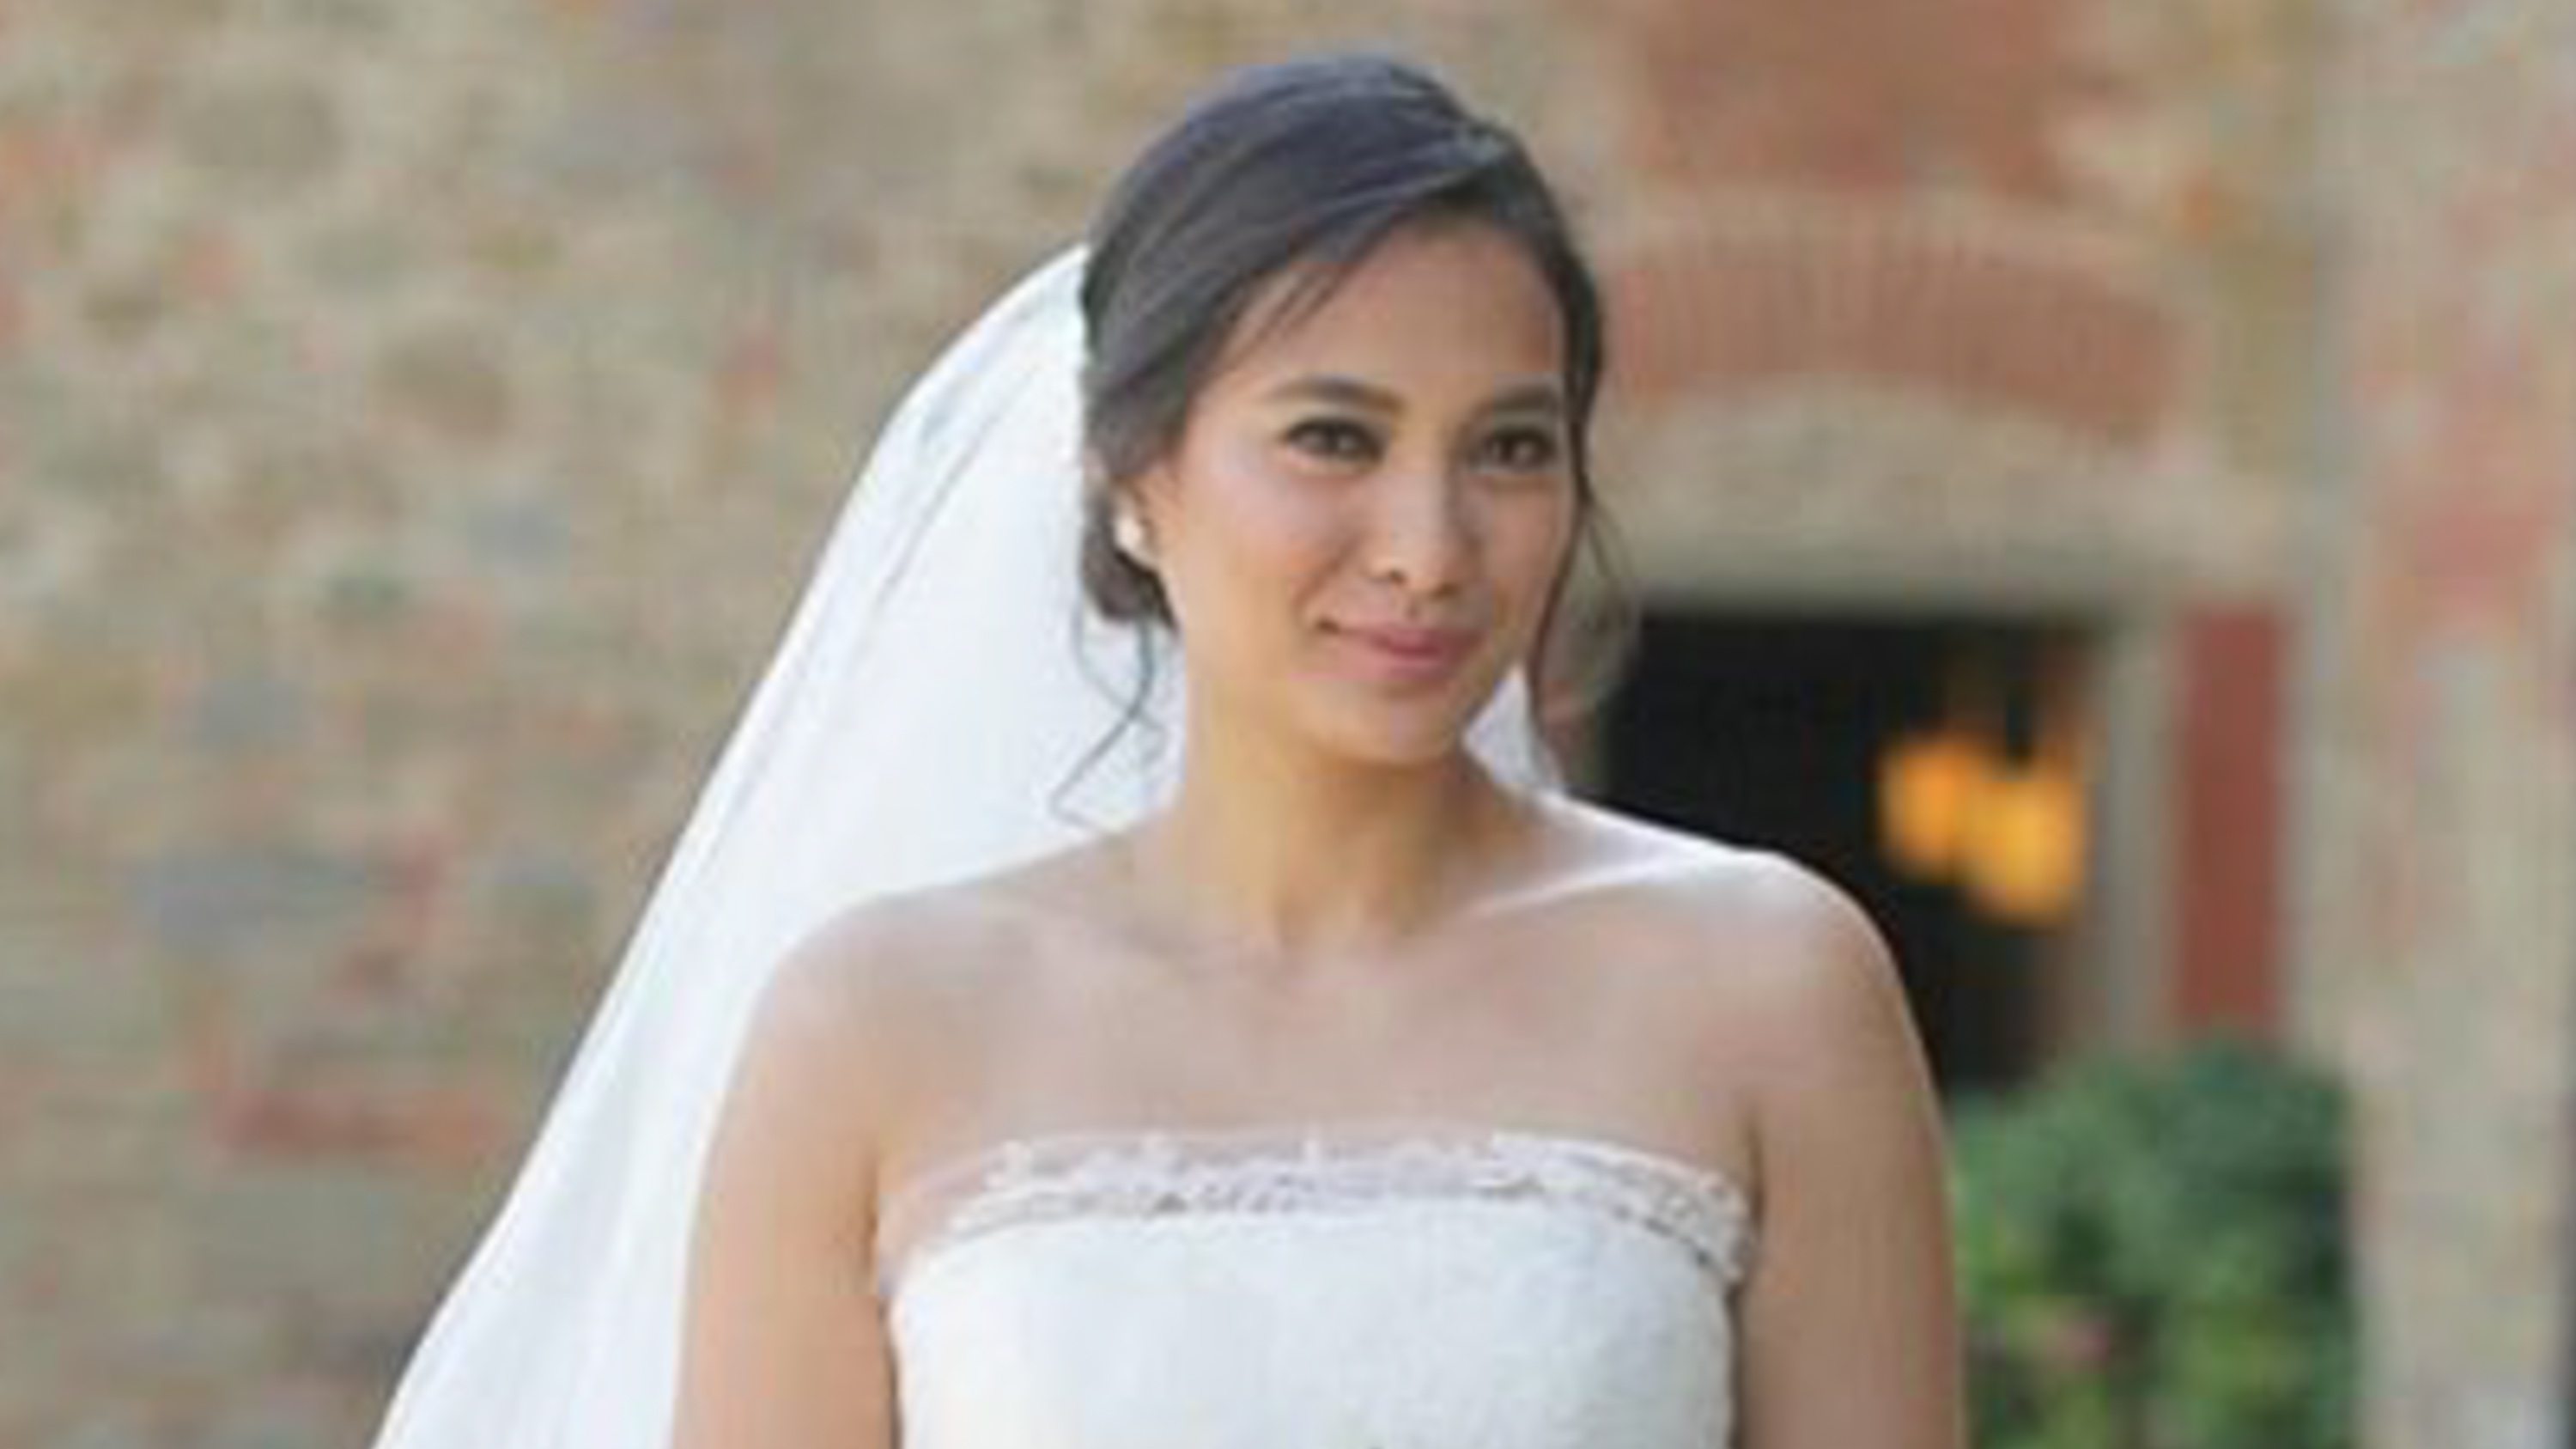 ISABELLE DAZA. Belle Daza wears a Vera Wang gown on her wedding day. Screengrab from Instagram/patdy11 